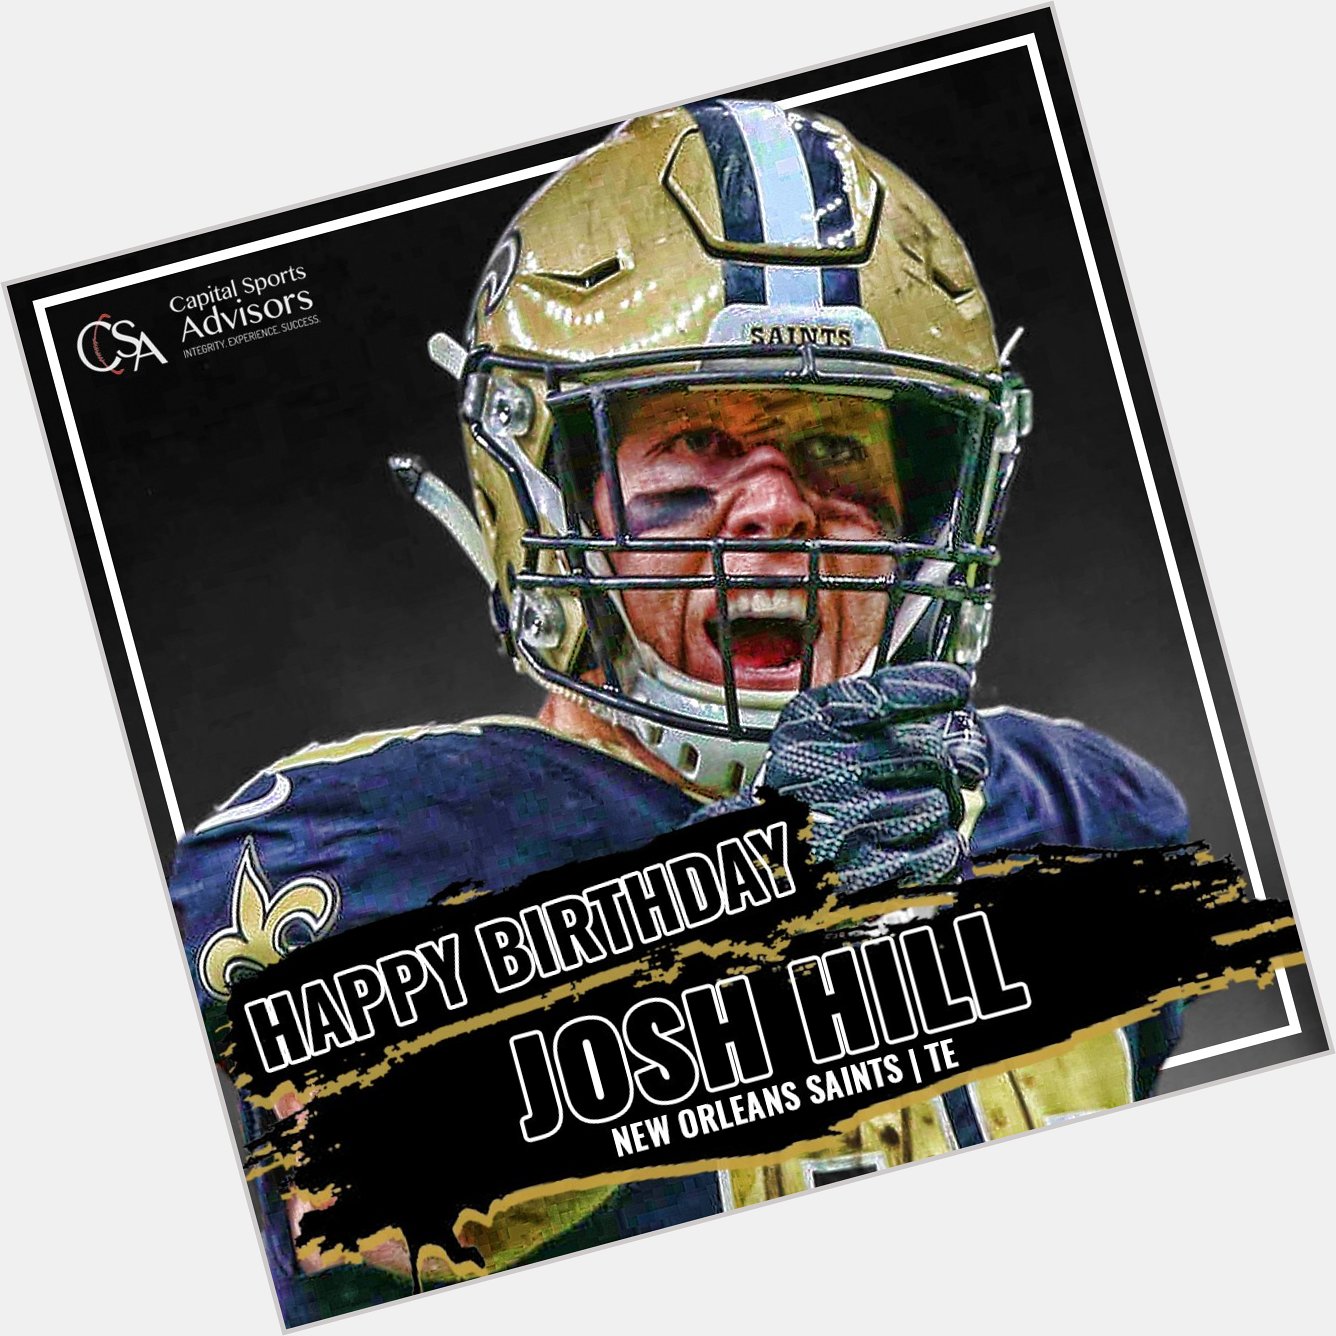 Wishing a Happy Birthday to client Josh Hill of the 